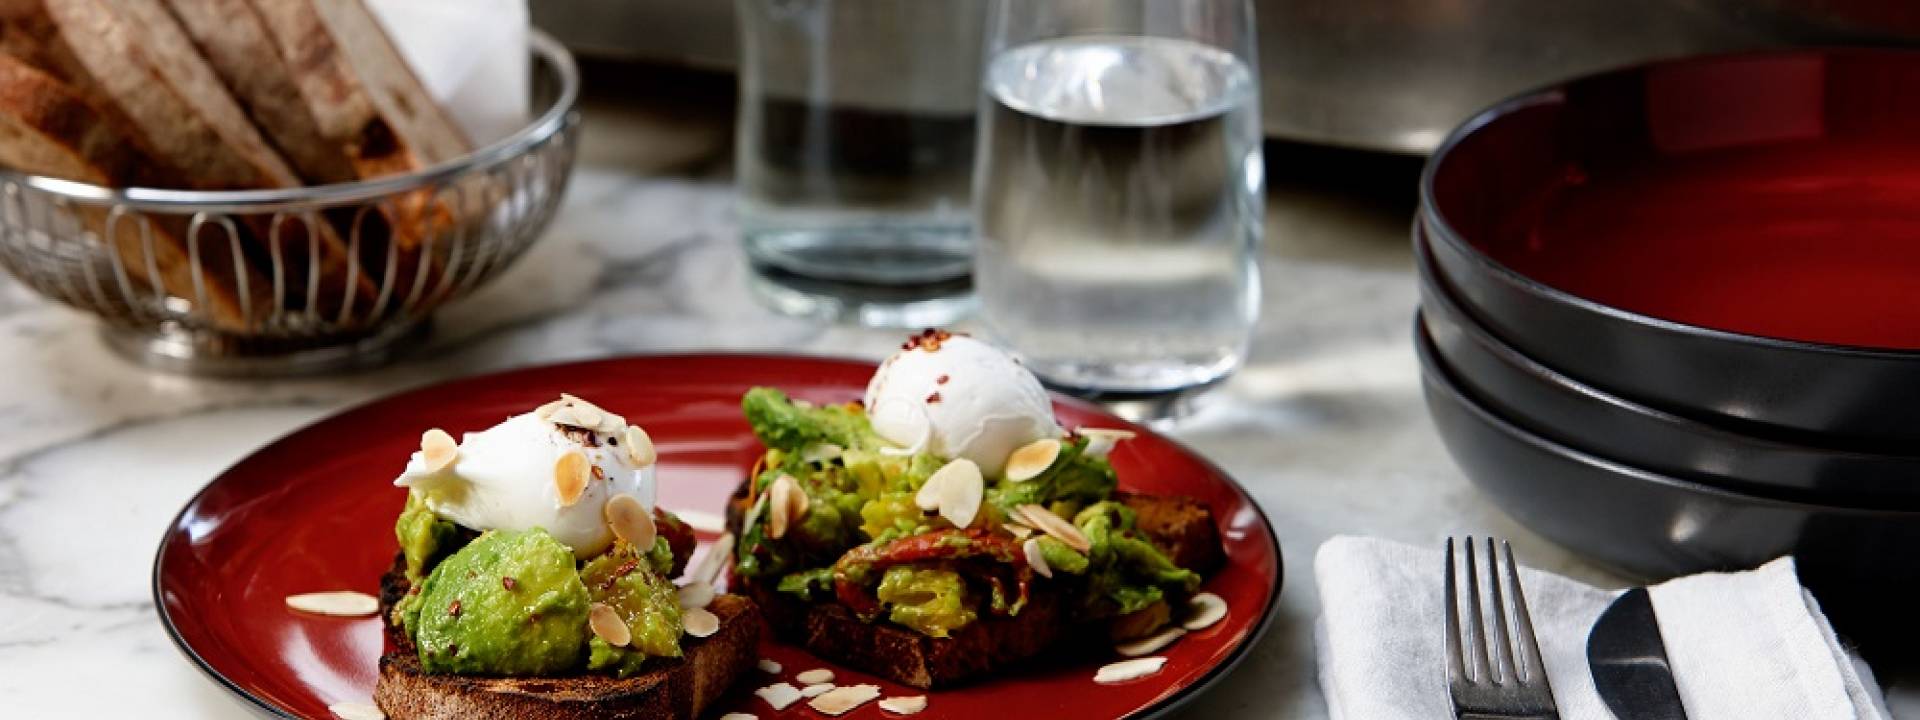 Avocado on Toast with Poached Eggs